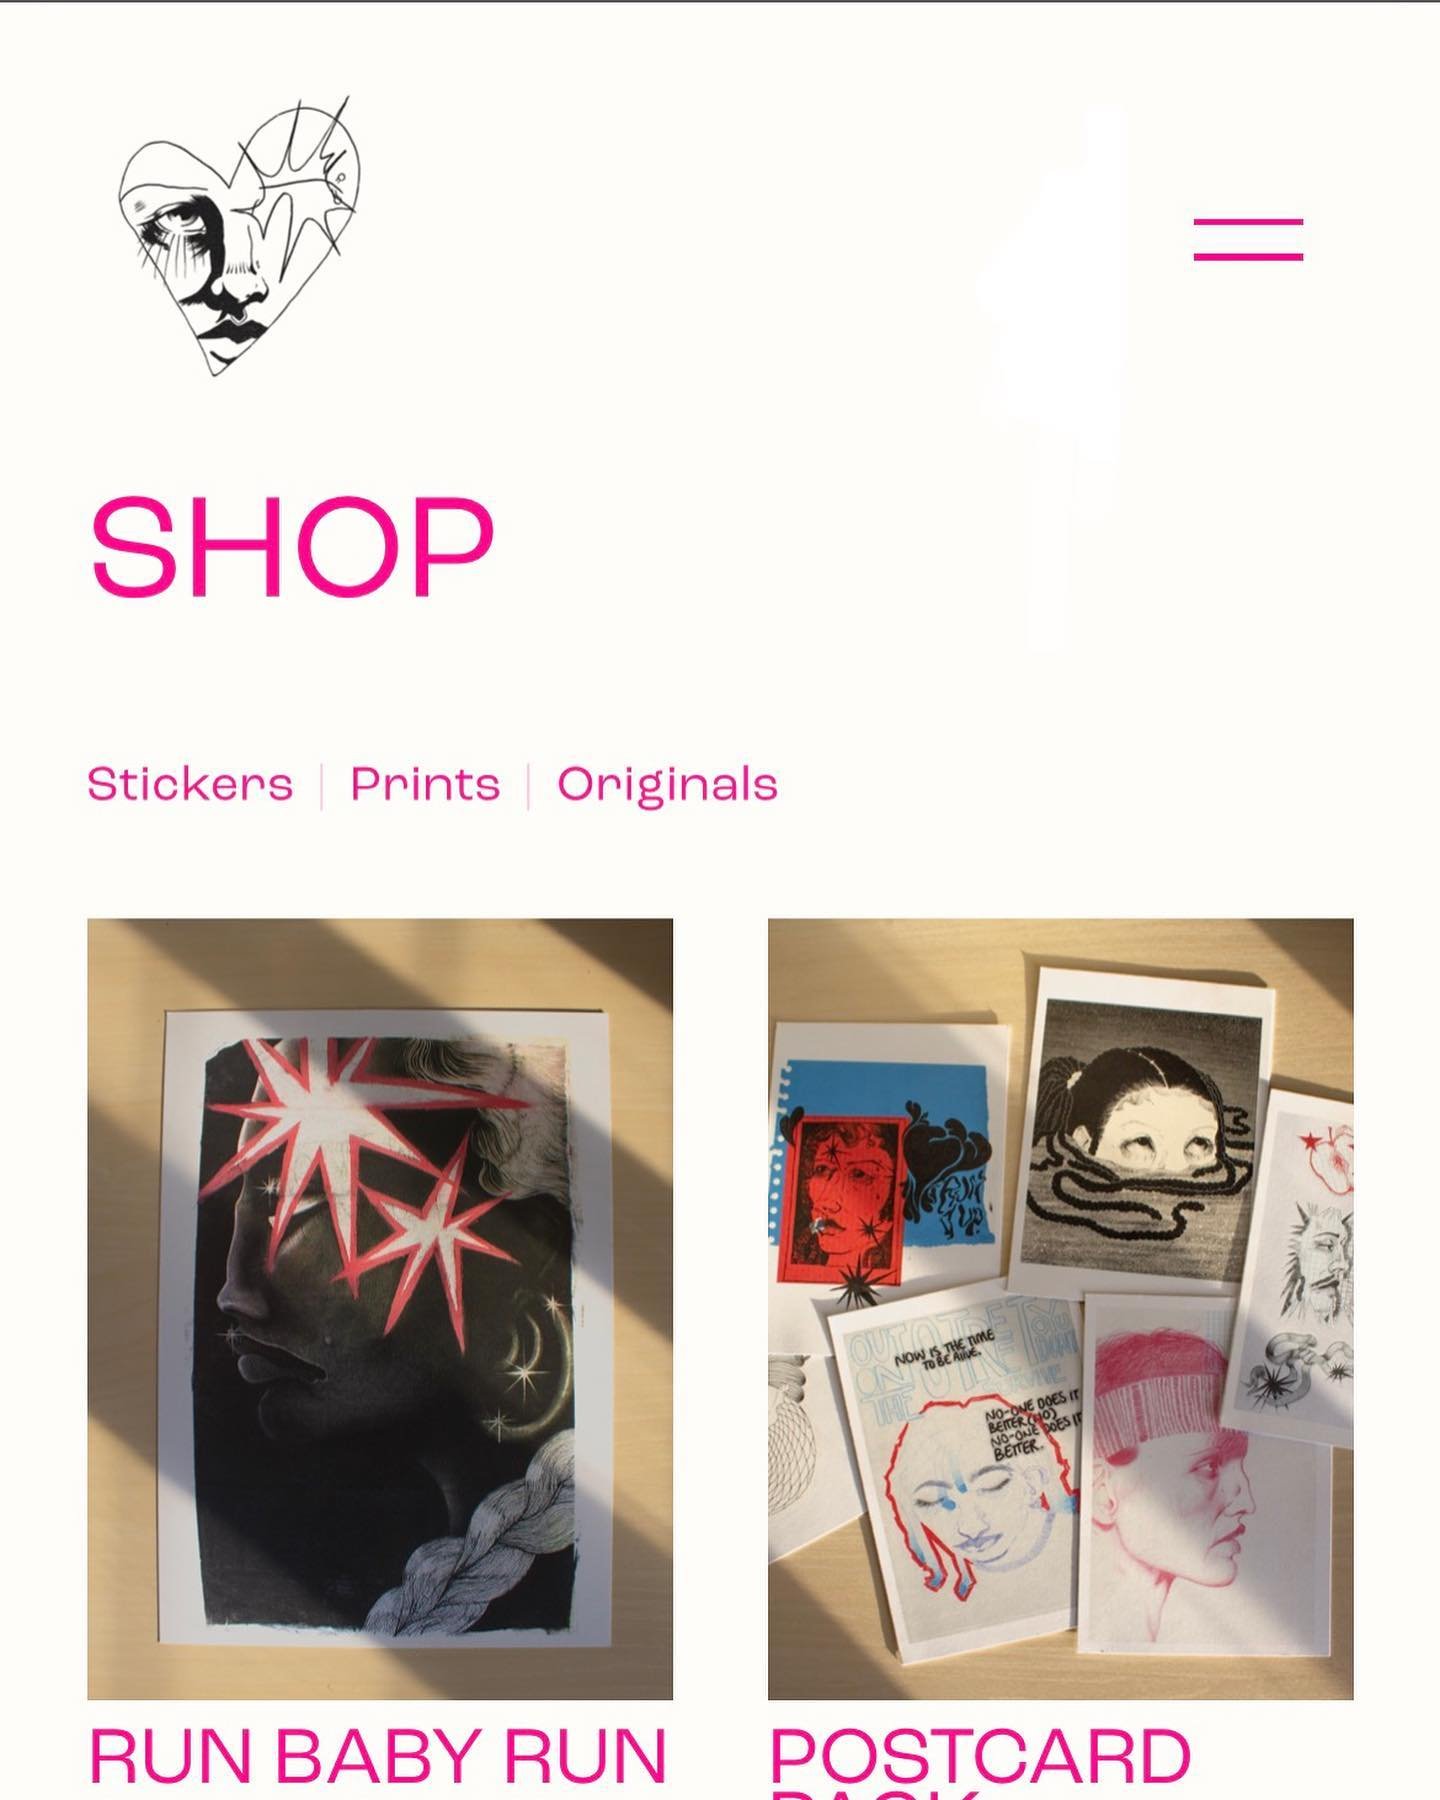 Online shop is now up and running with prints and stickers available 🪲✨💓